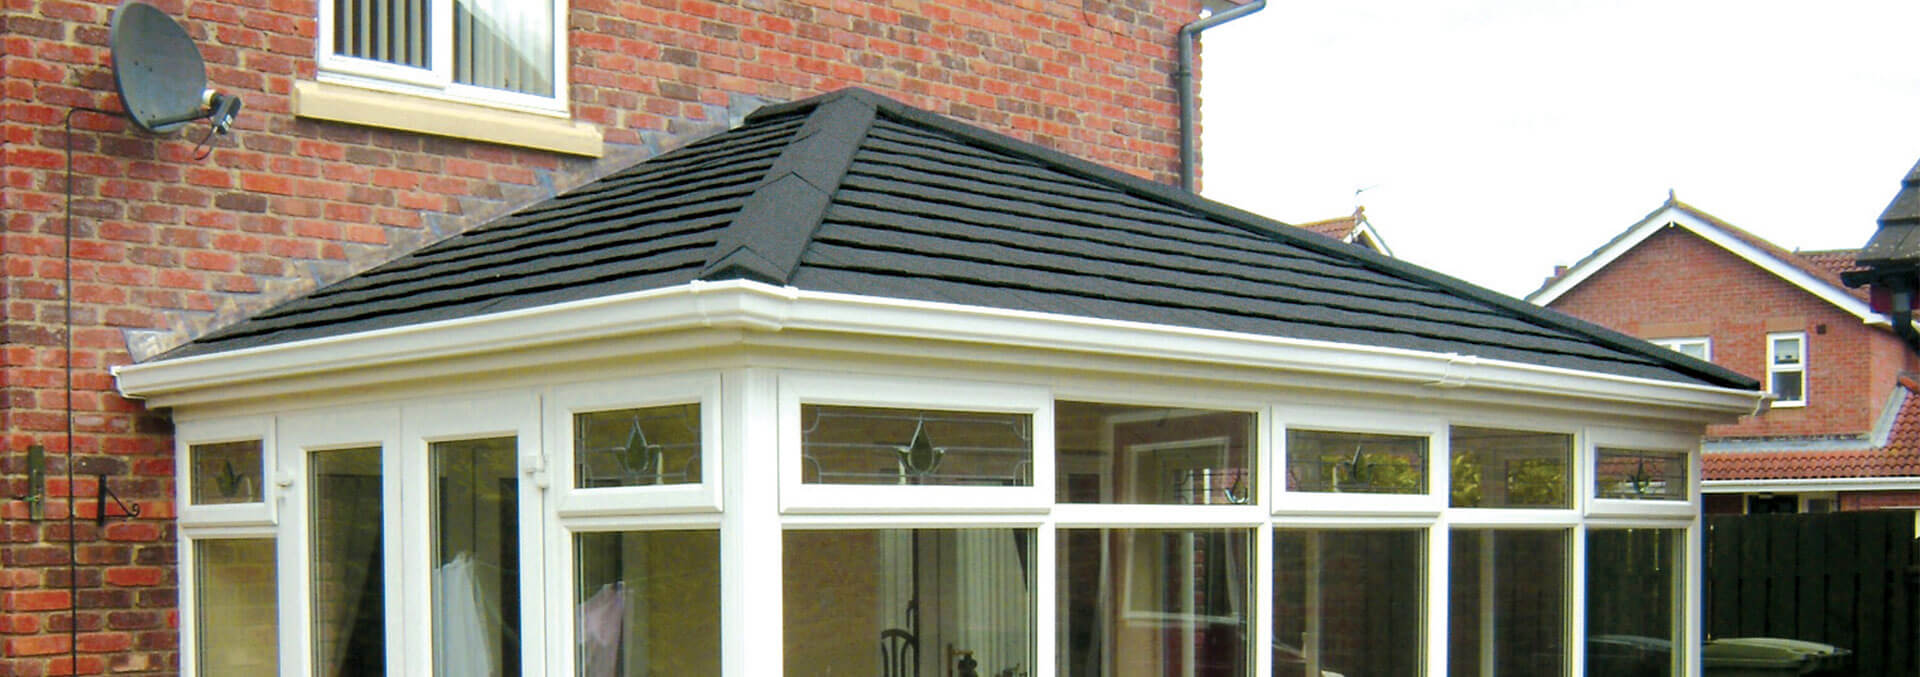 Large uPVC conservatory with grey tiled roof